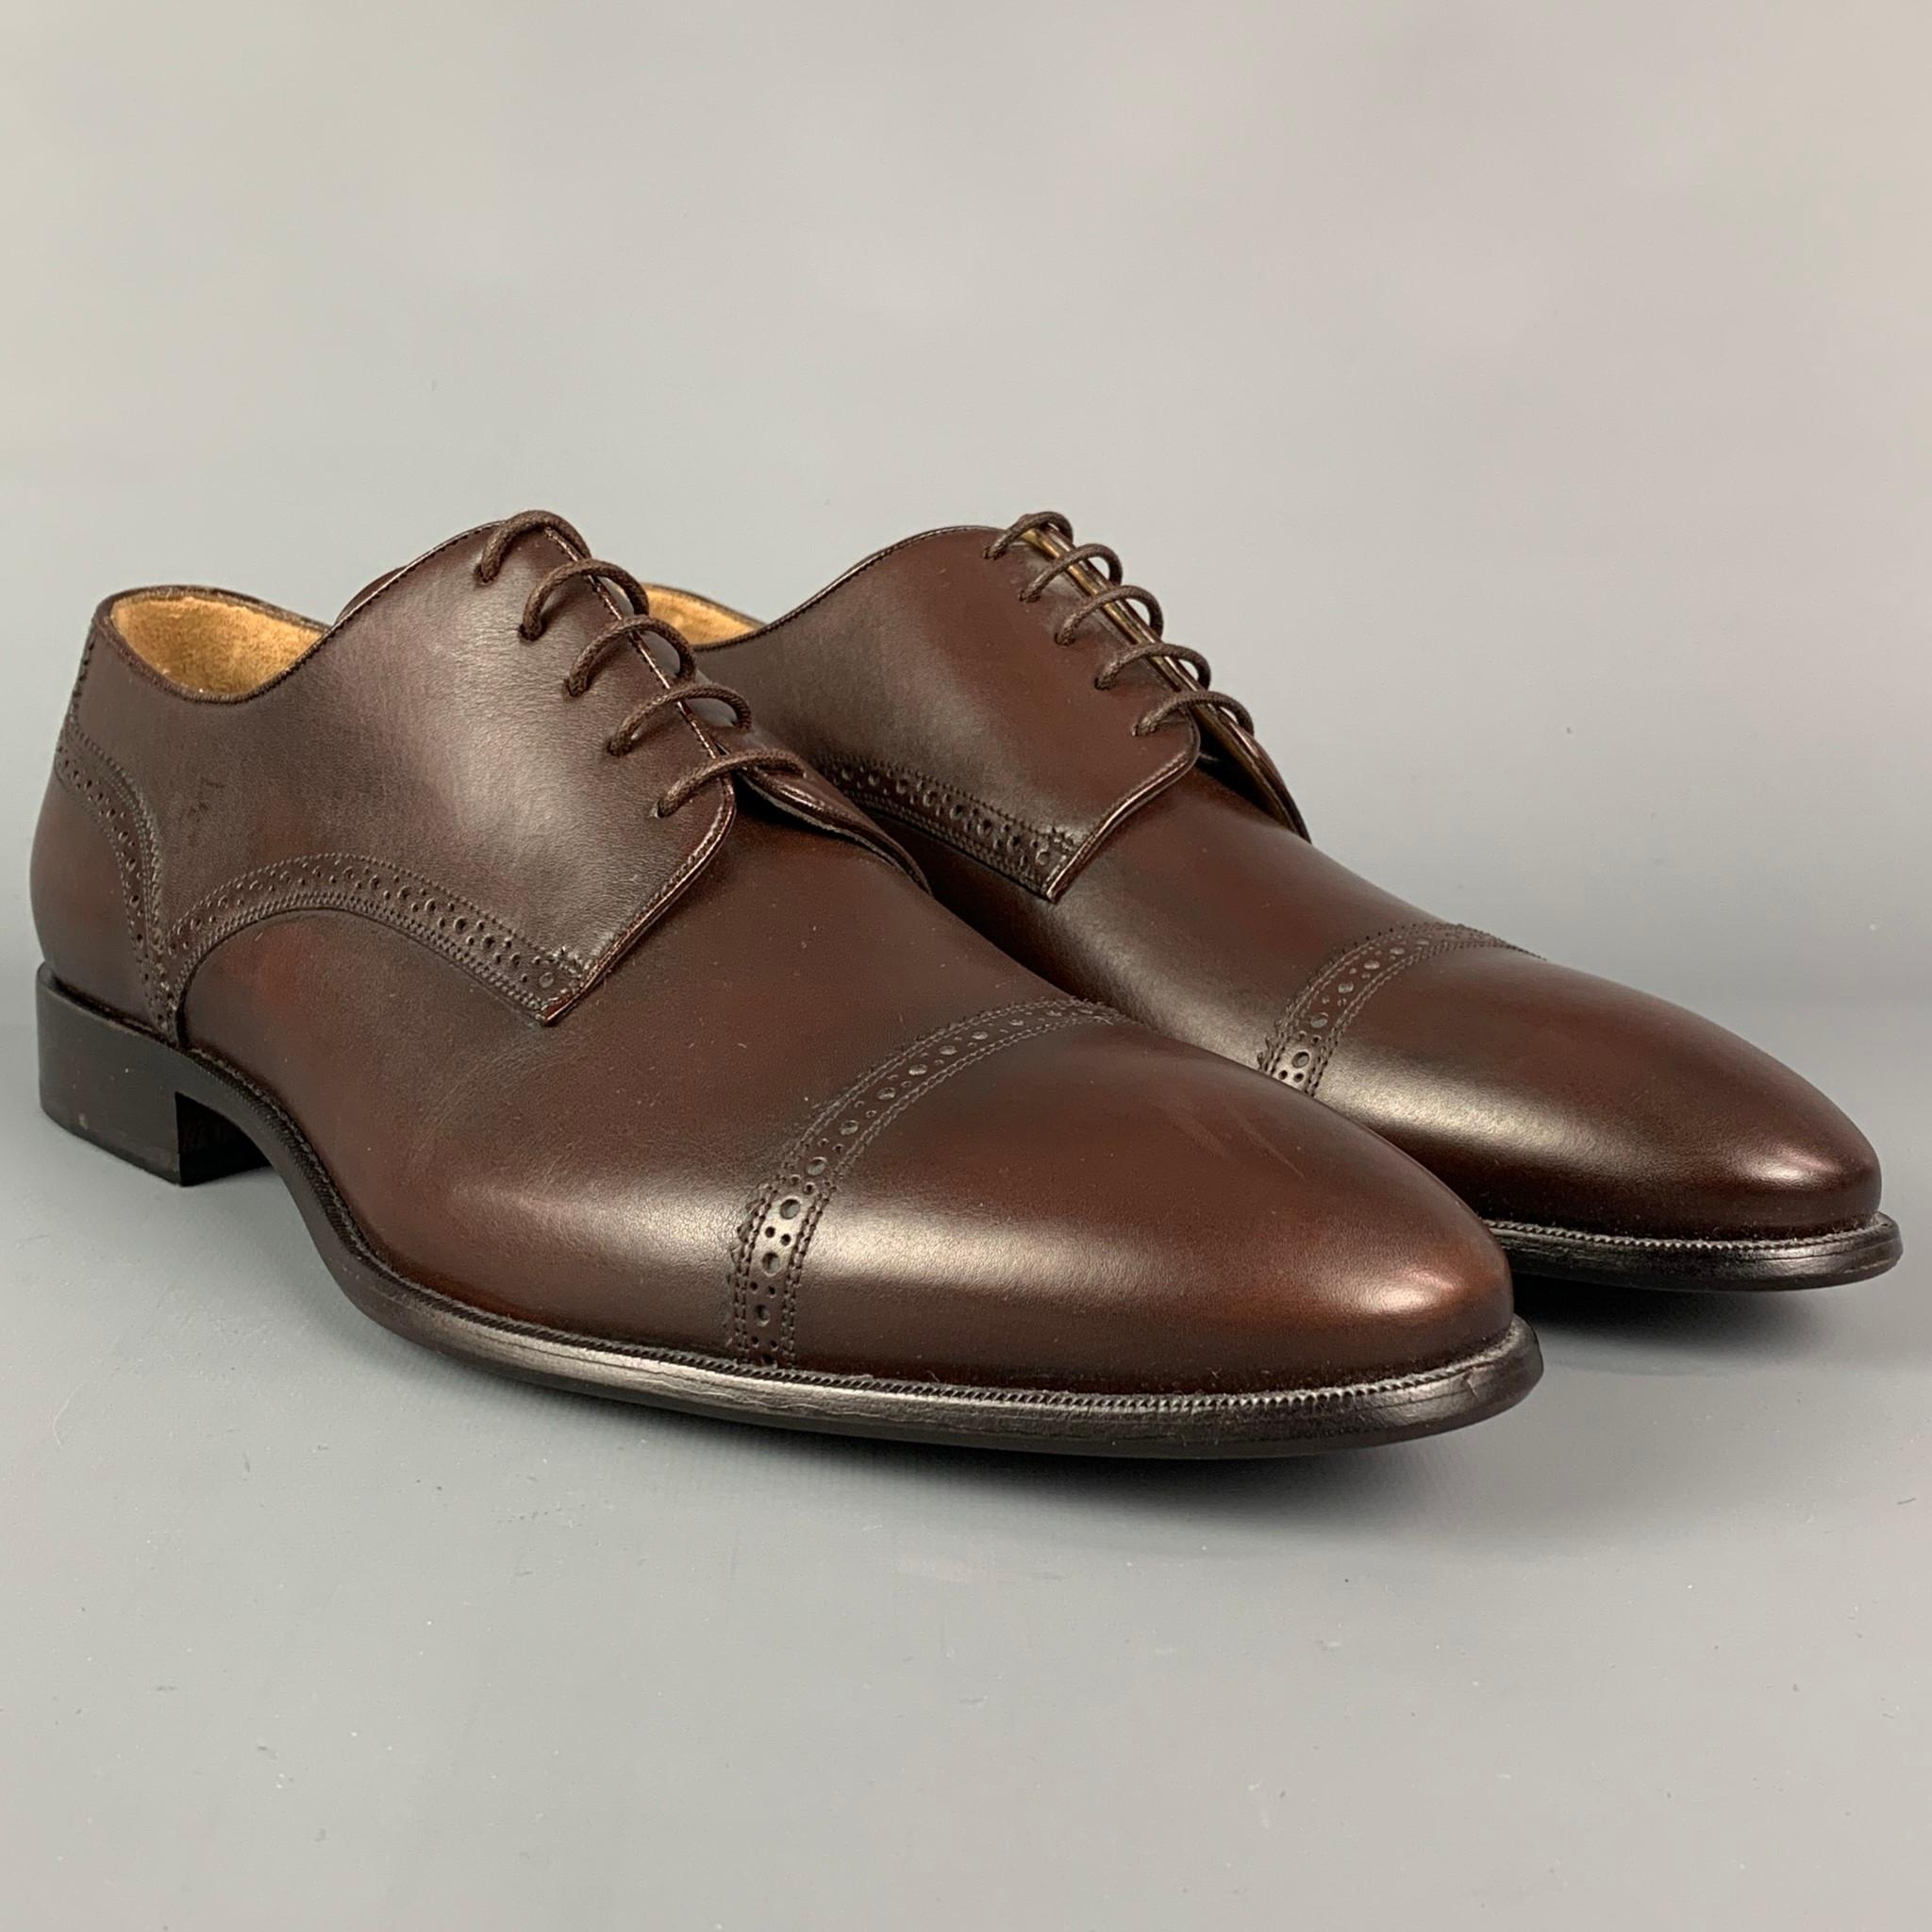 BALLY shoes comes in a brown leather featuring a cap toe, leather sole, and a lace up closure. 

New Without Tags. 
Marked: 8.5 EU / 9.5 US

Outsole: 12.5 in. x 4.25 in. 